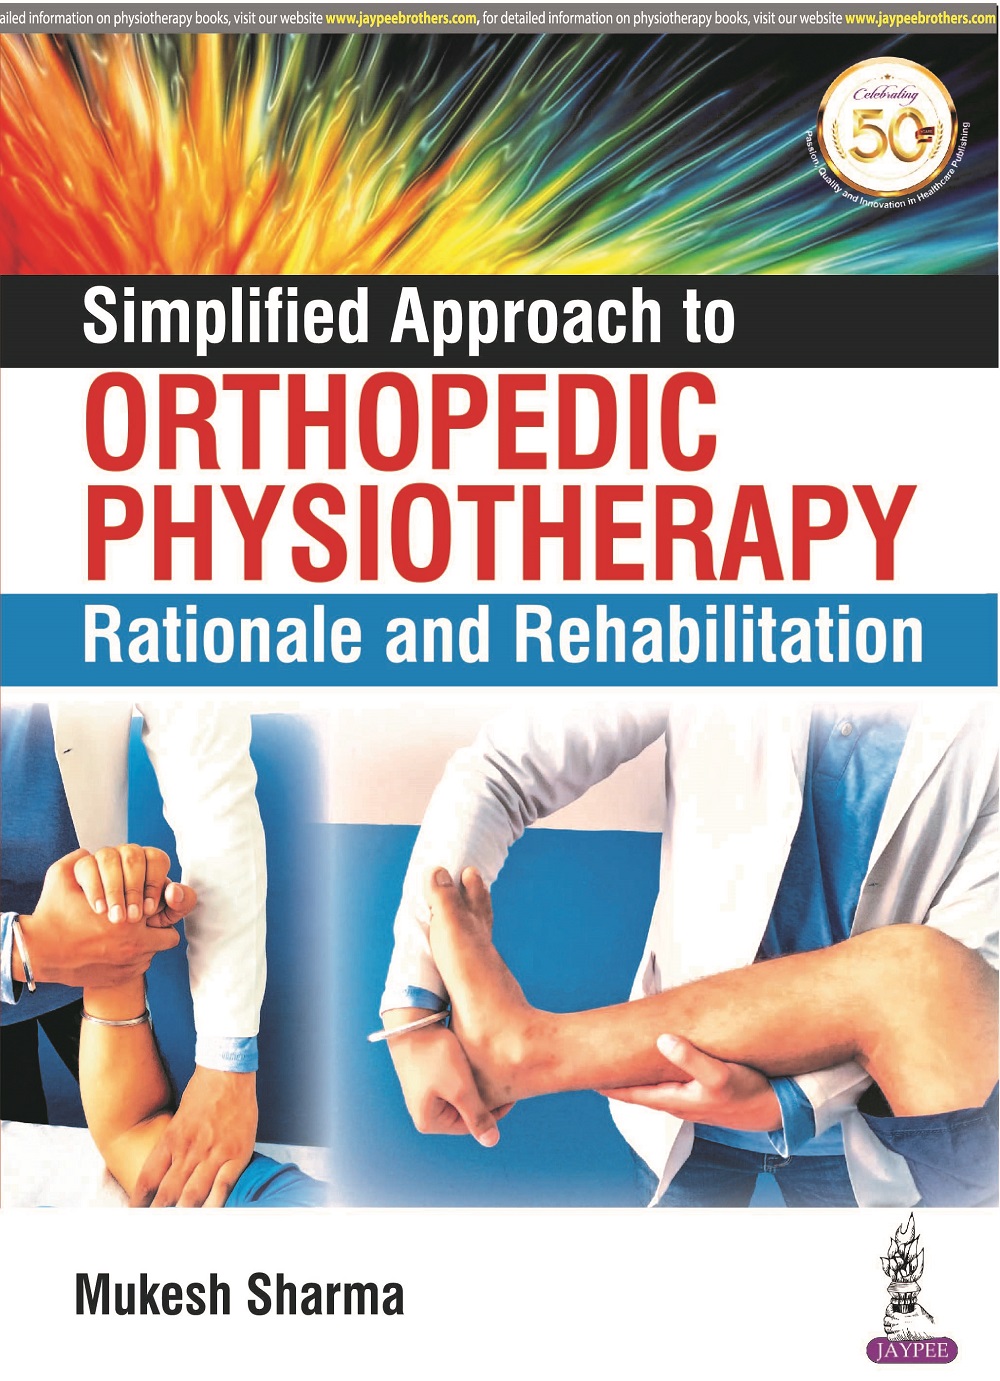 Simplified Approach To Orthopedic Physiotherapy Rationale And Rehabilitation